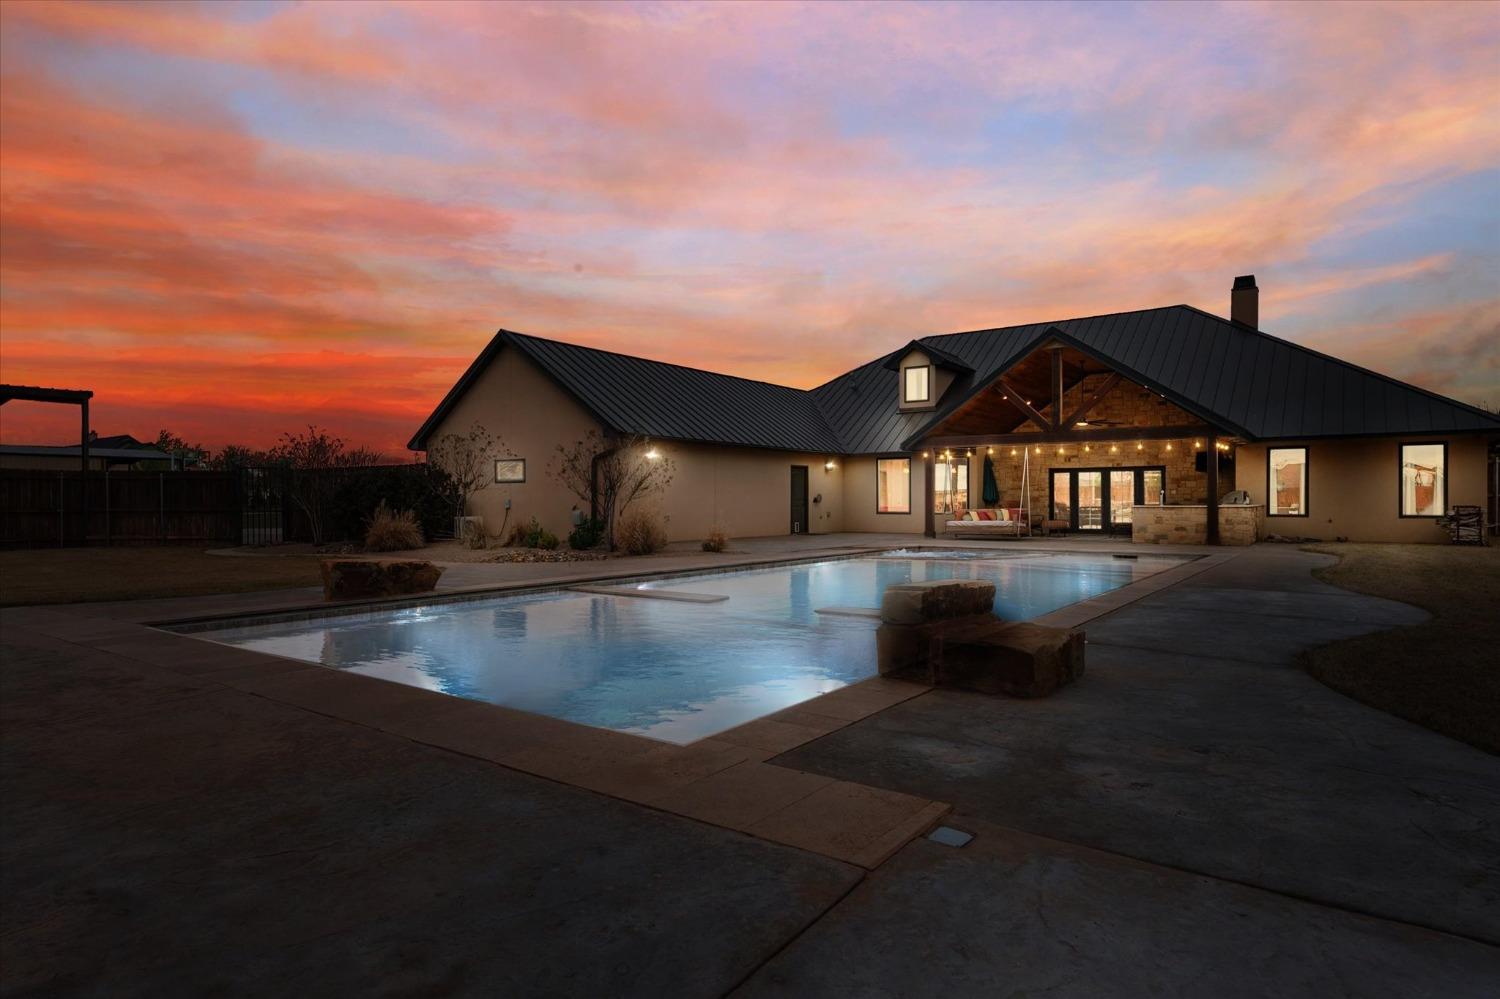 This stunning home in Shallowater ISD features 4 bedrooms, 4 bathrooms, a 3 car garage, and a 50 x 60 shop with an overhead garage door. The unique barrel ceiling in the entryway feeds perfectly into the cathedral ceiling in the living room for a flawless entrance to the home. The home boast a new sports pool with a plunge pool on the deep end, a tanning ledge, and corner hot tub. The pool is sure to wow you with its self cleaning features, lighting, and electric cover. This is the home to entertain all your friends and family with, from the pool, to the outdoor kitchen, custom fire pit, theatre room, and a loft! Schedule your tour today to make this home yours!